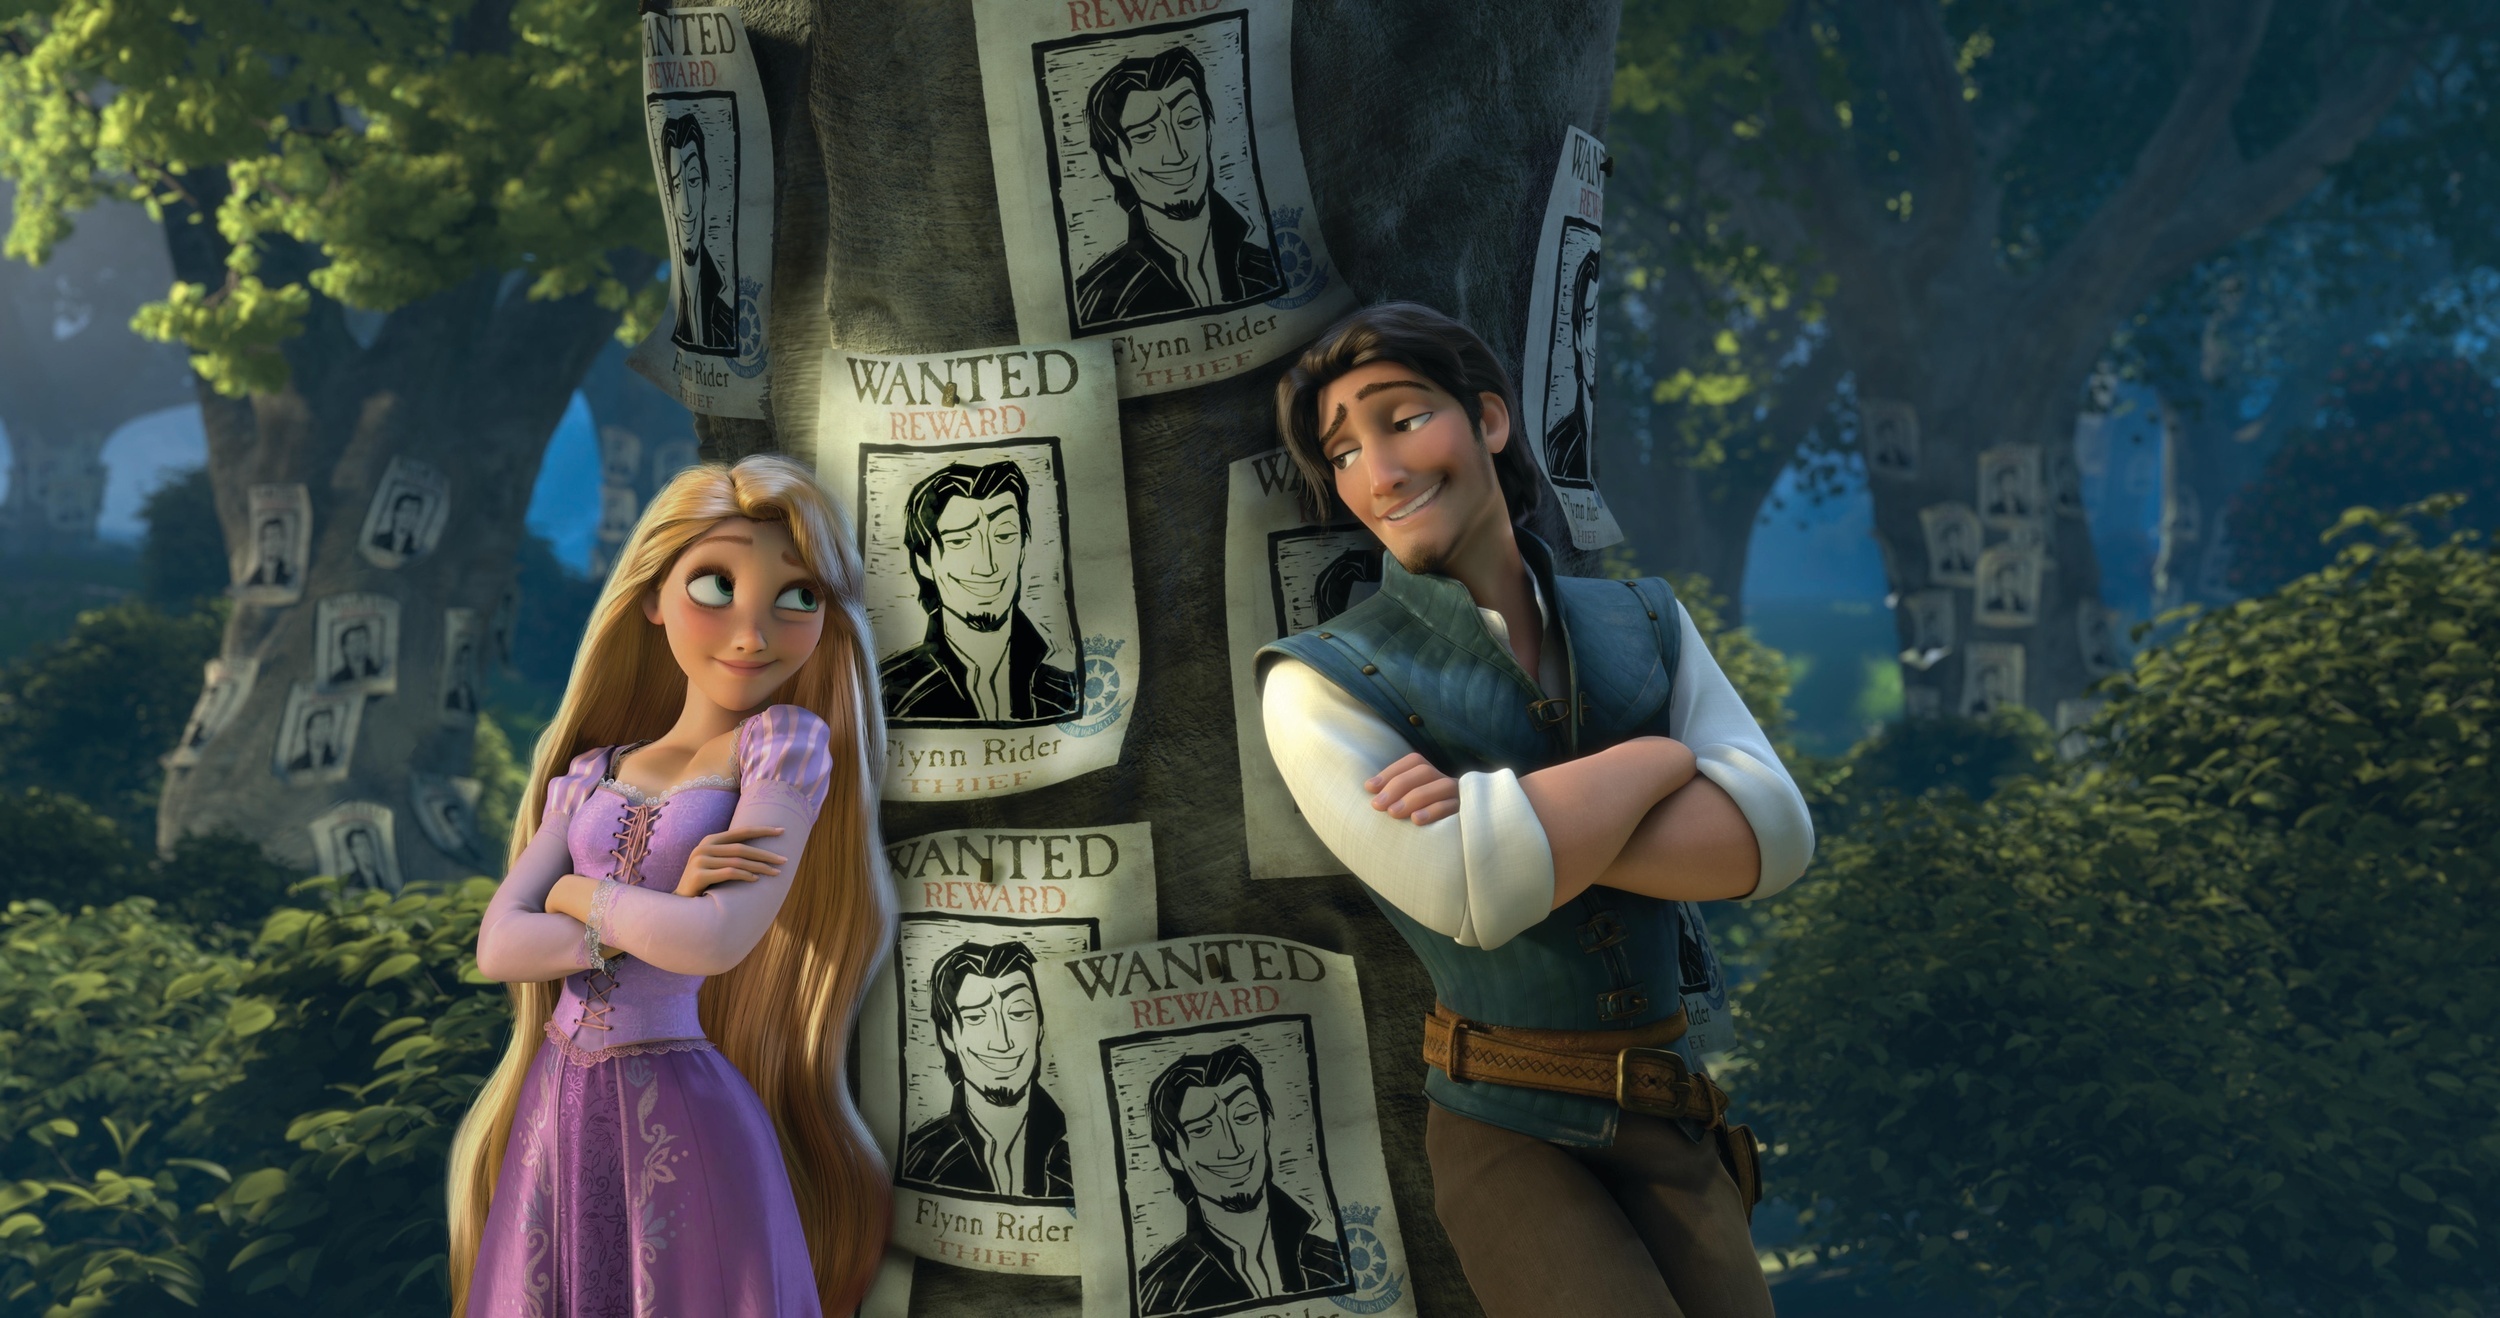 <p>Disney’s <em>Tangled</em> was a fraught production, leading to worries it would end up a disaster and a box-office fiasco. It ended up being a big hit that spawned multiple TV shows. The film begins not with Rapunzel but with Flynn Rider giving a voiceover that starts with, “This is the story of how I died.” He follows that with, “Don’t worry, this is actually a very fun story,” but that still grabs you.</p><p>You may also like: <a href='https://www.yardbarker.com/entertainment/articles/the_25_best_tv_shows_of_the_2010s_122723/s1__30421124'>The 25 best TV shows of the 2010s</a></p>